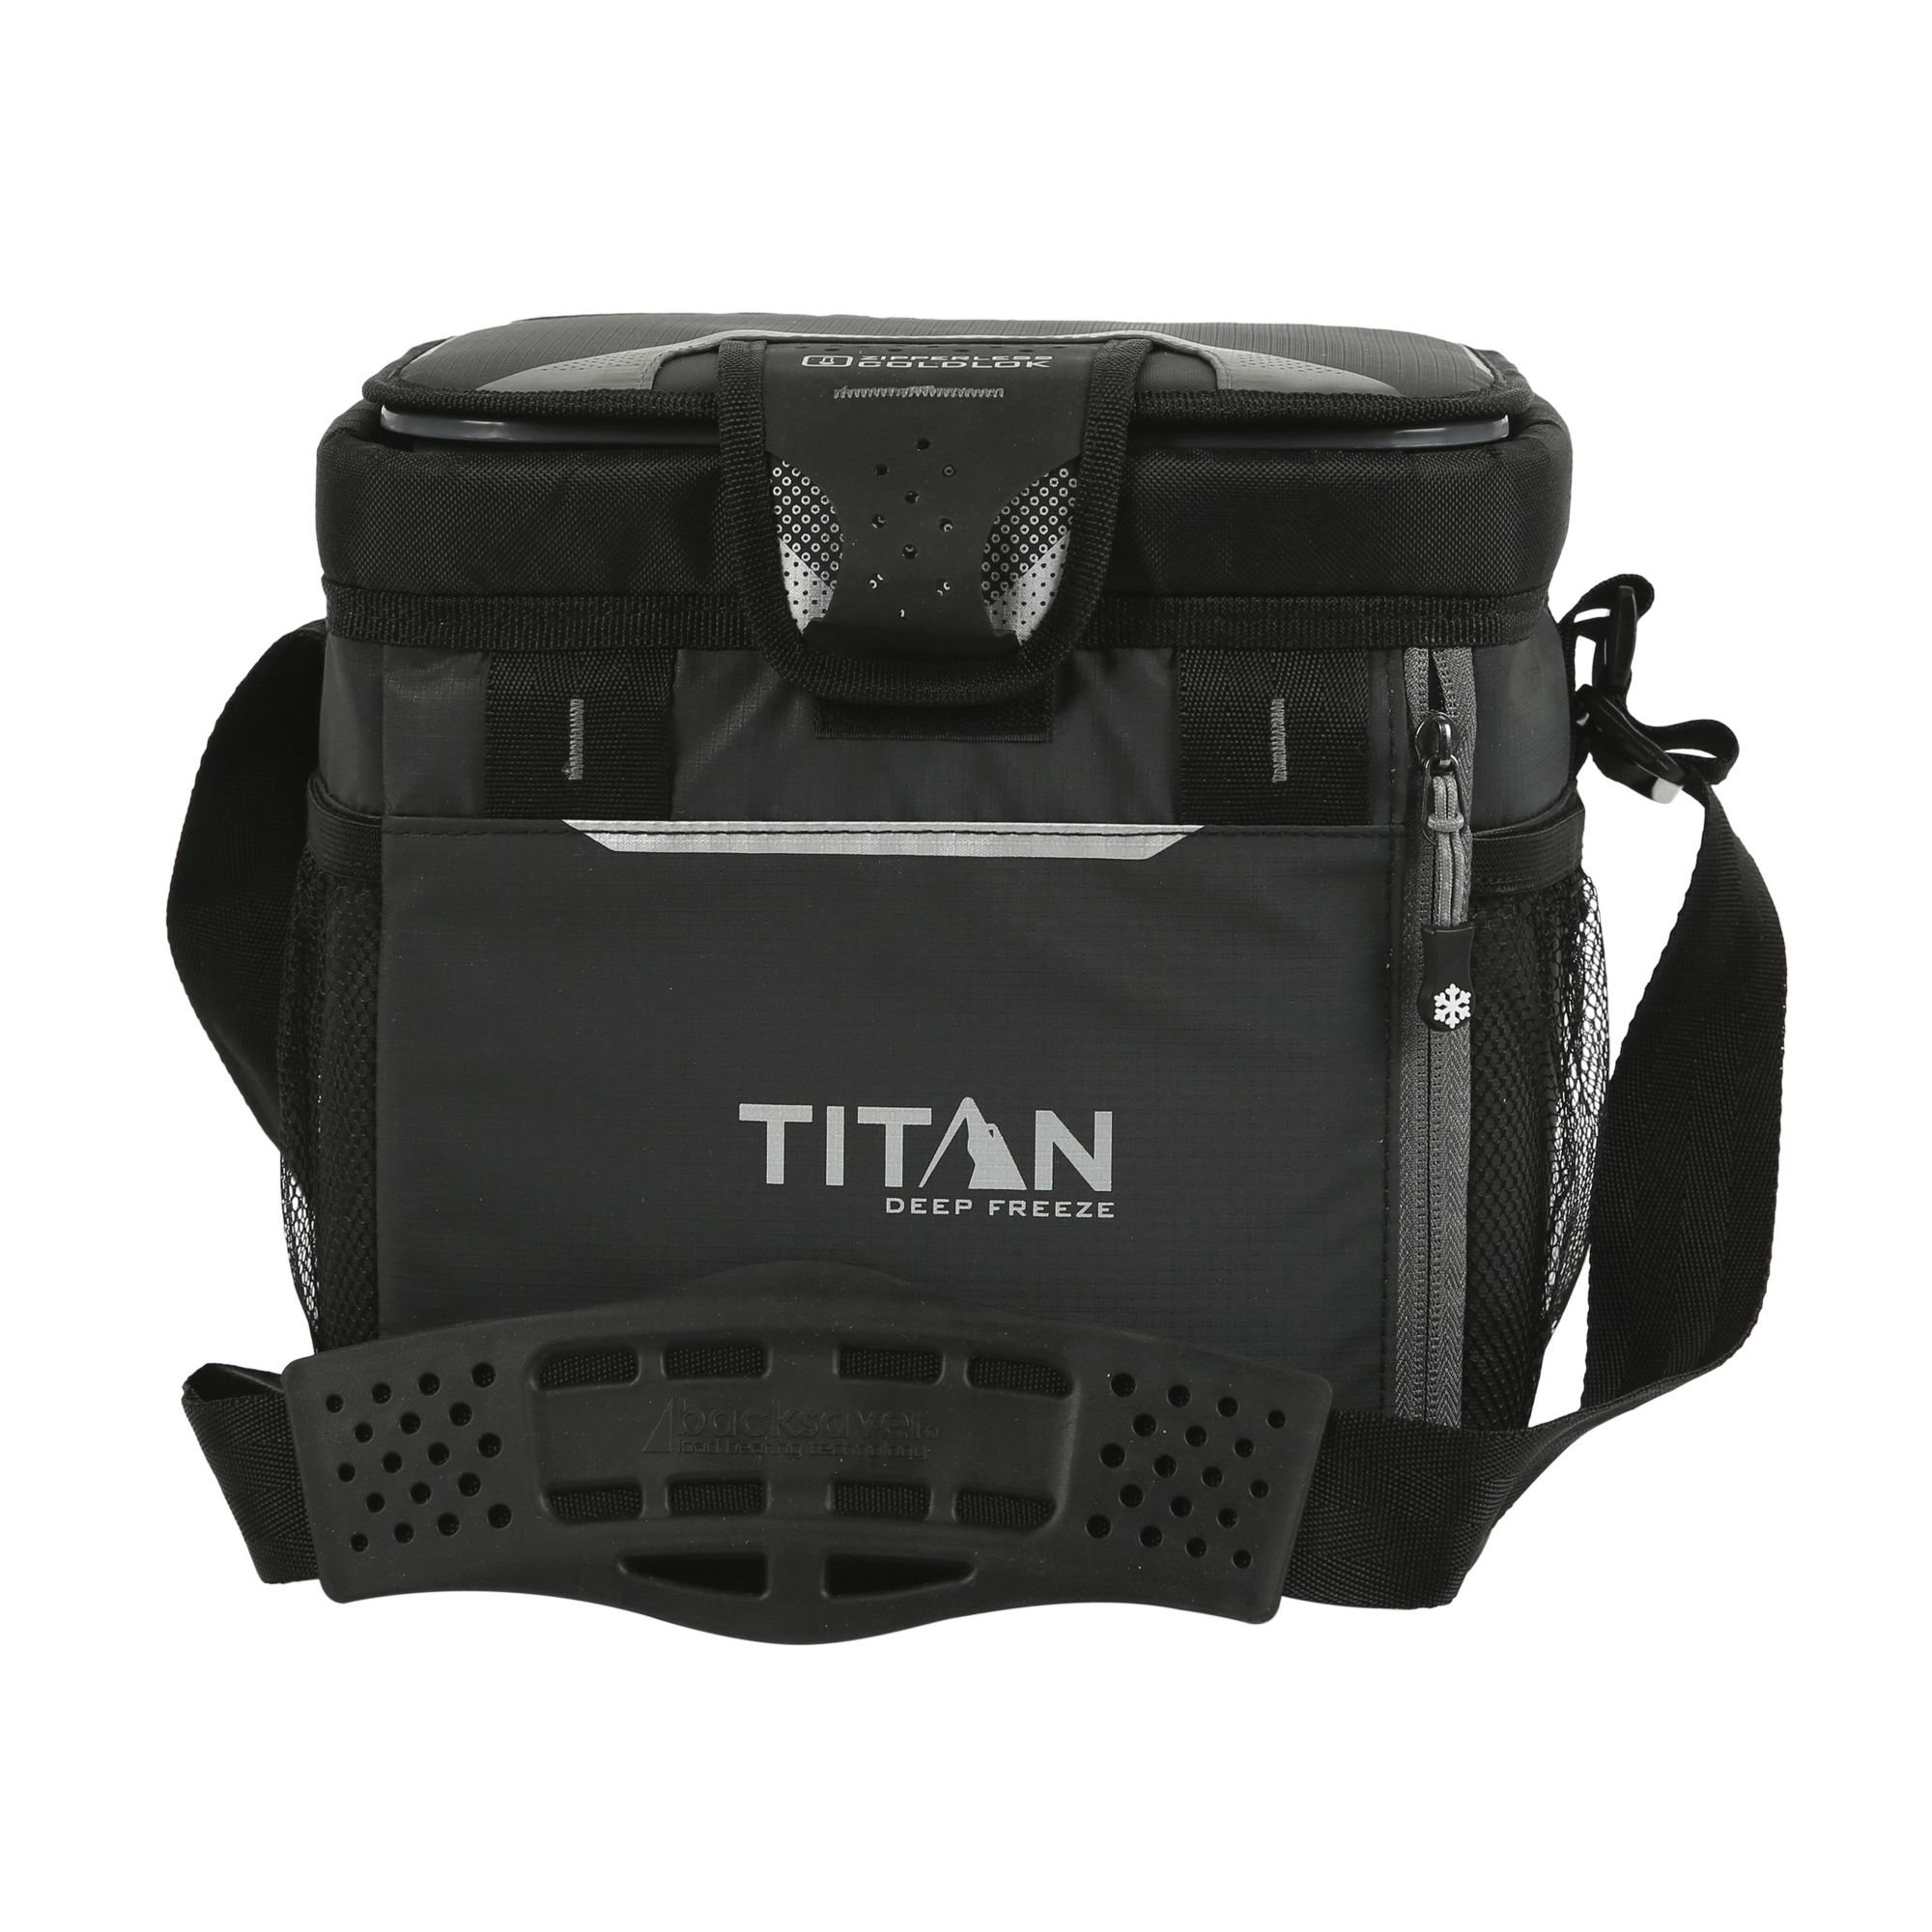 Titan Expandable Lunch Pack Only $14.99 at Costco (Keeps Food Fridge Cold  for 6 Hours!)